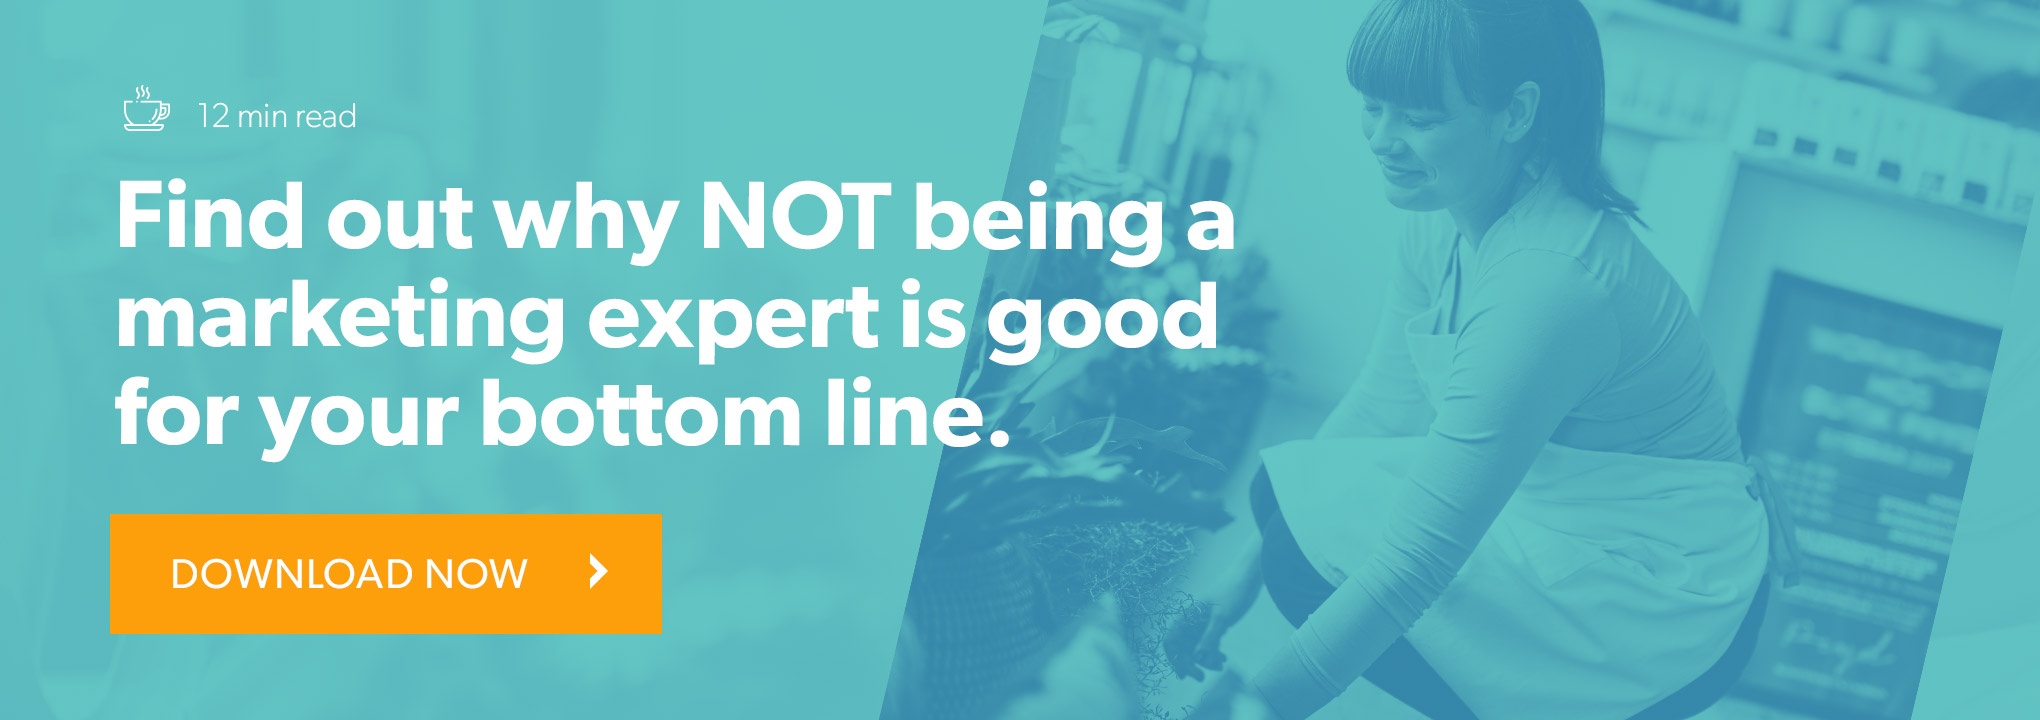 Find out why NOT being a marketing expert is good for your bottom line.